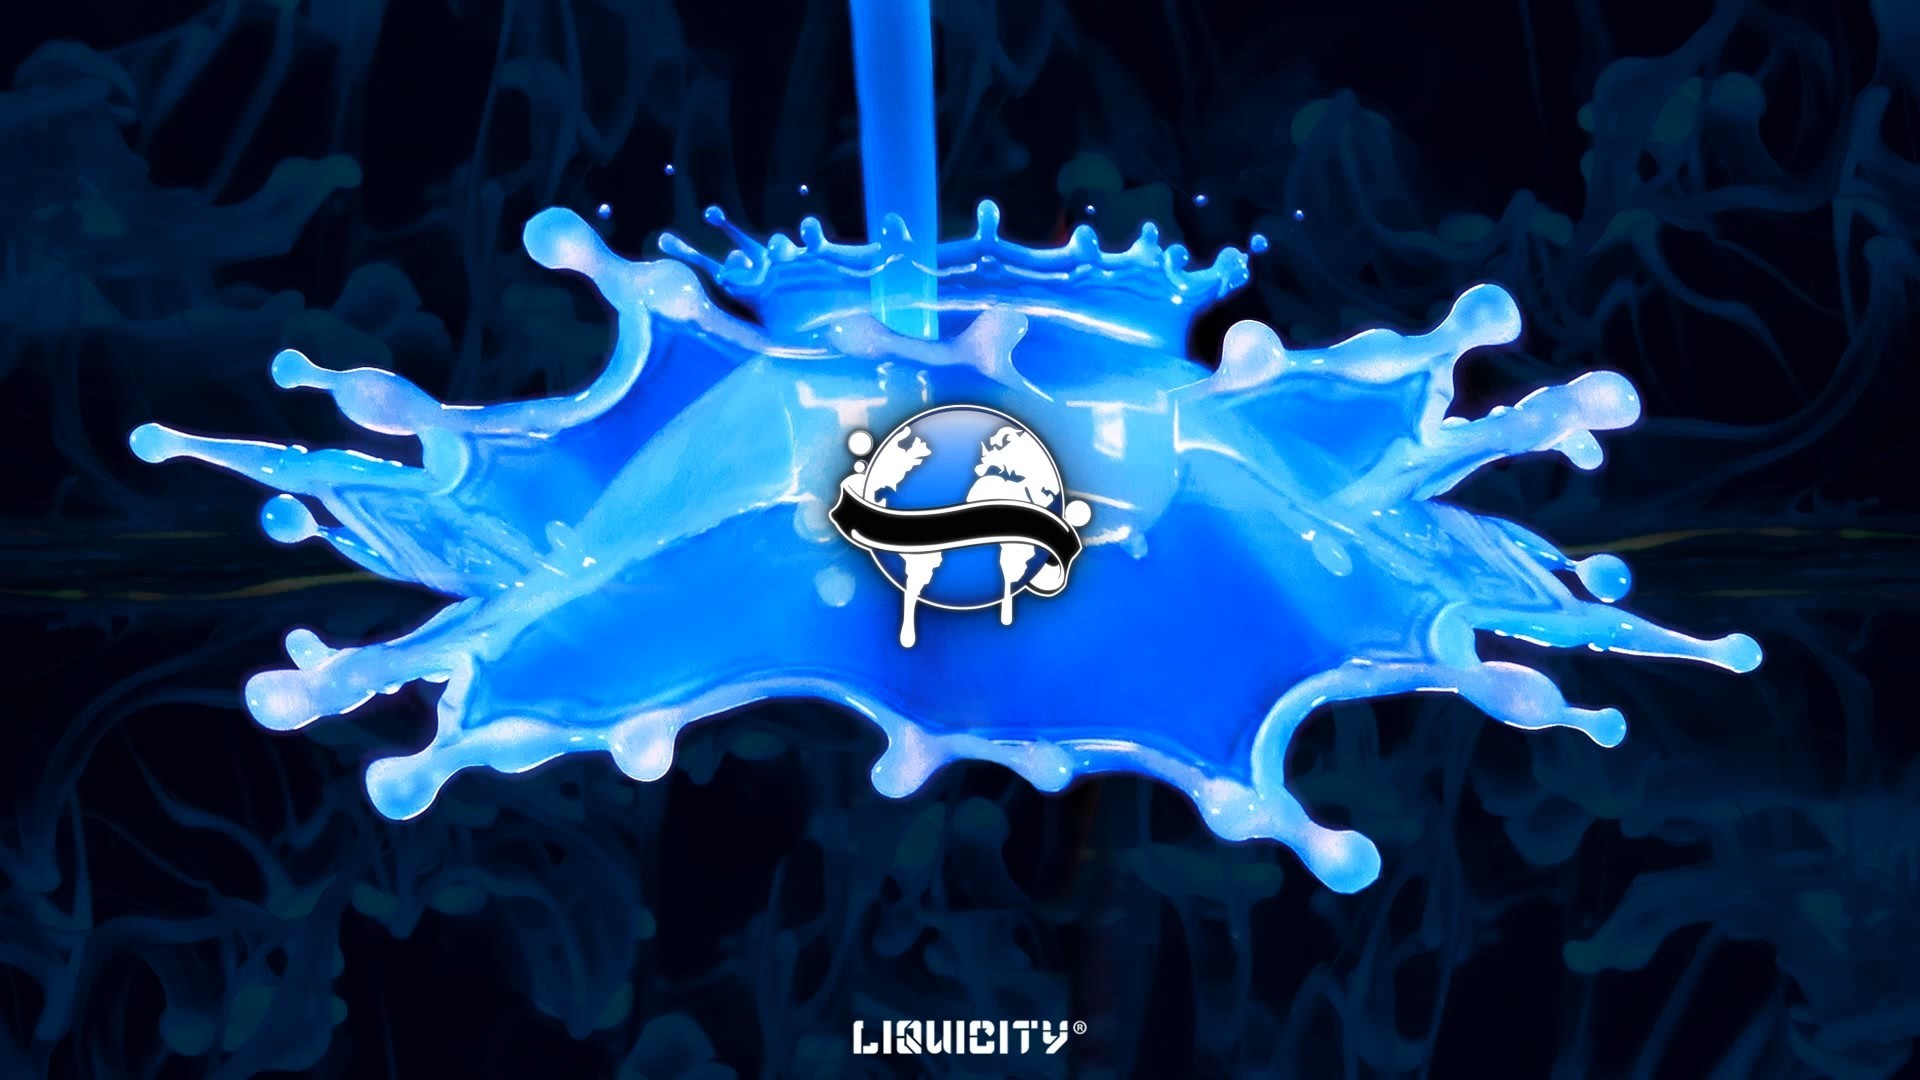 1920x1080 Abstract drum and bass liquicity wallpaper